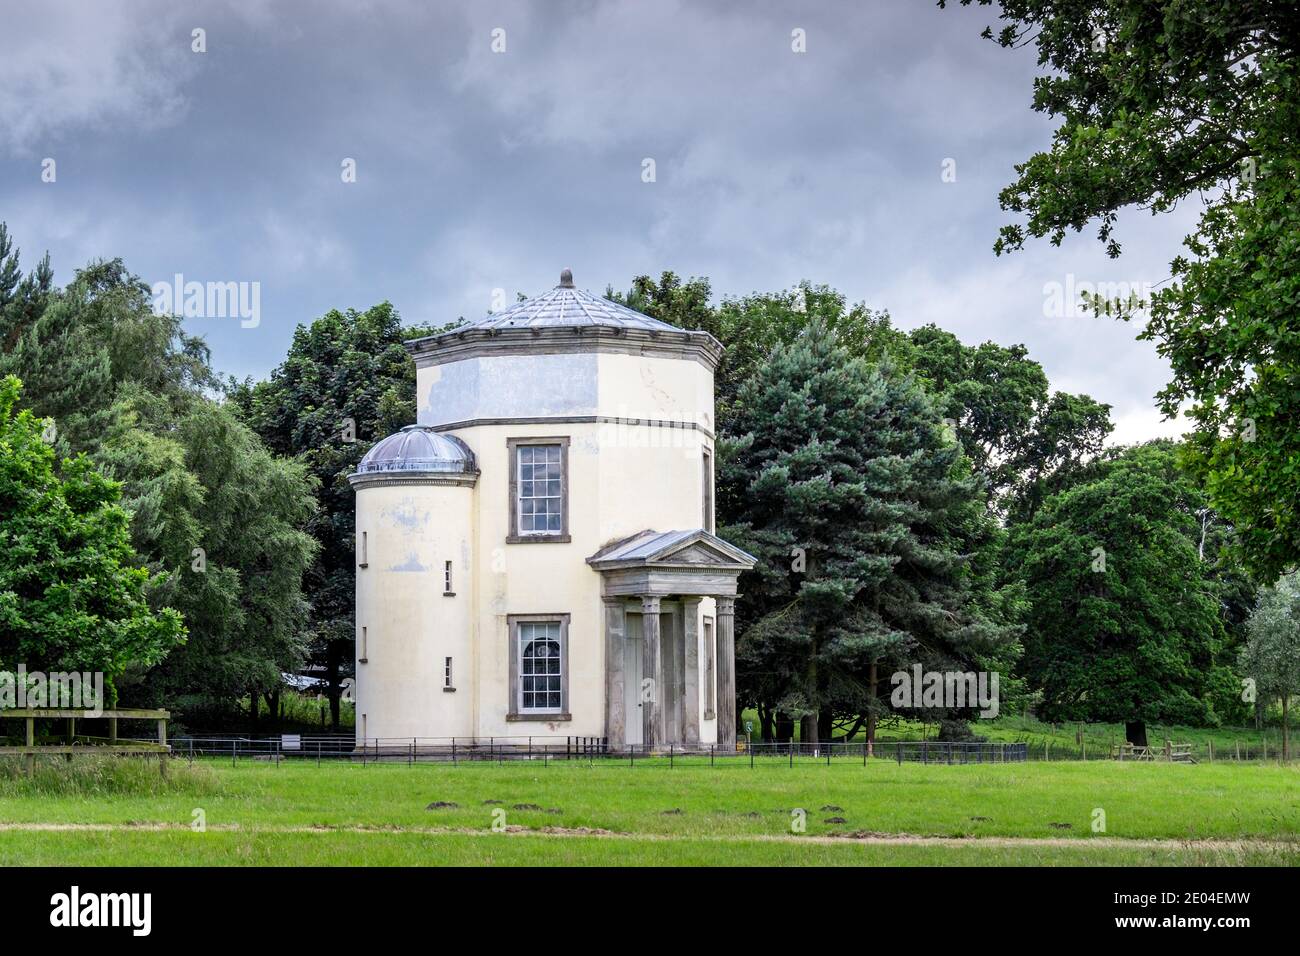 The Tower of the Winds, located in the grounds of the Shugborough Estate, near to Stafford, Staffordshire, England, UK Stock Photo